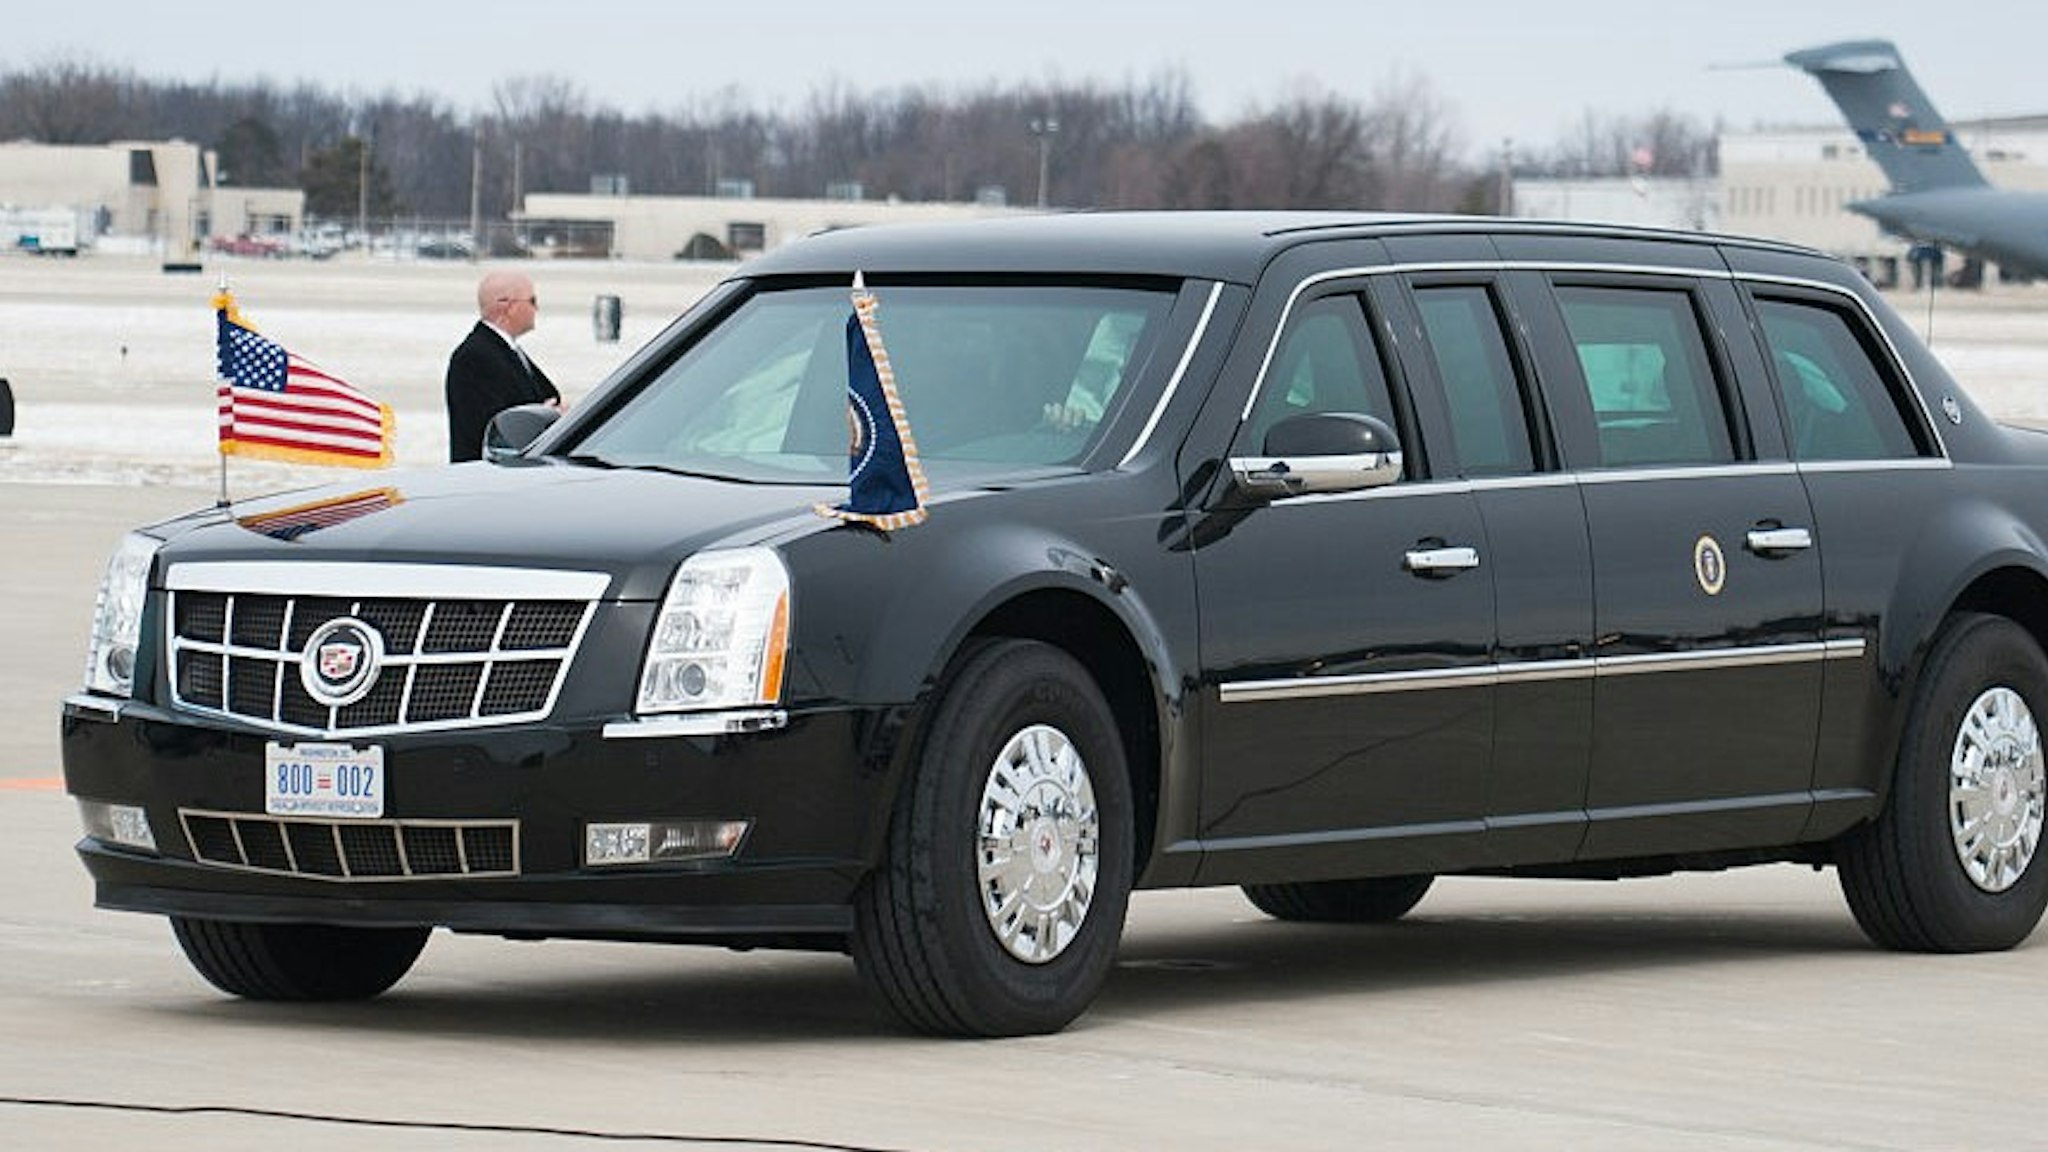 SPRINGFIELD, IL - FEBRUARY 10: A Presidential limousine moves in place during the arrival of President Barack Obama at Abraham Lincoln Capital Airport on February 10, 2016 in Springfield, IL. Mr. Obama is traveling to Springfield to address the joint state legislature amid the state's budget crisis. (Photo: